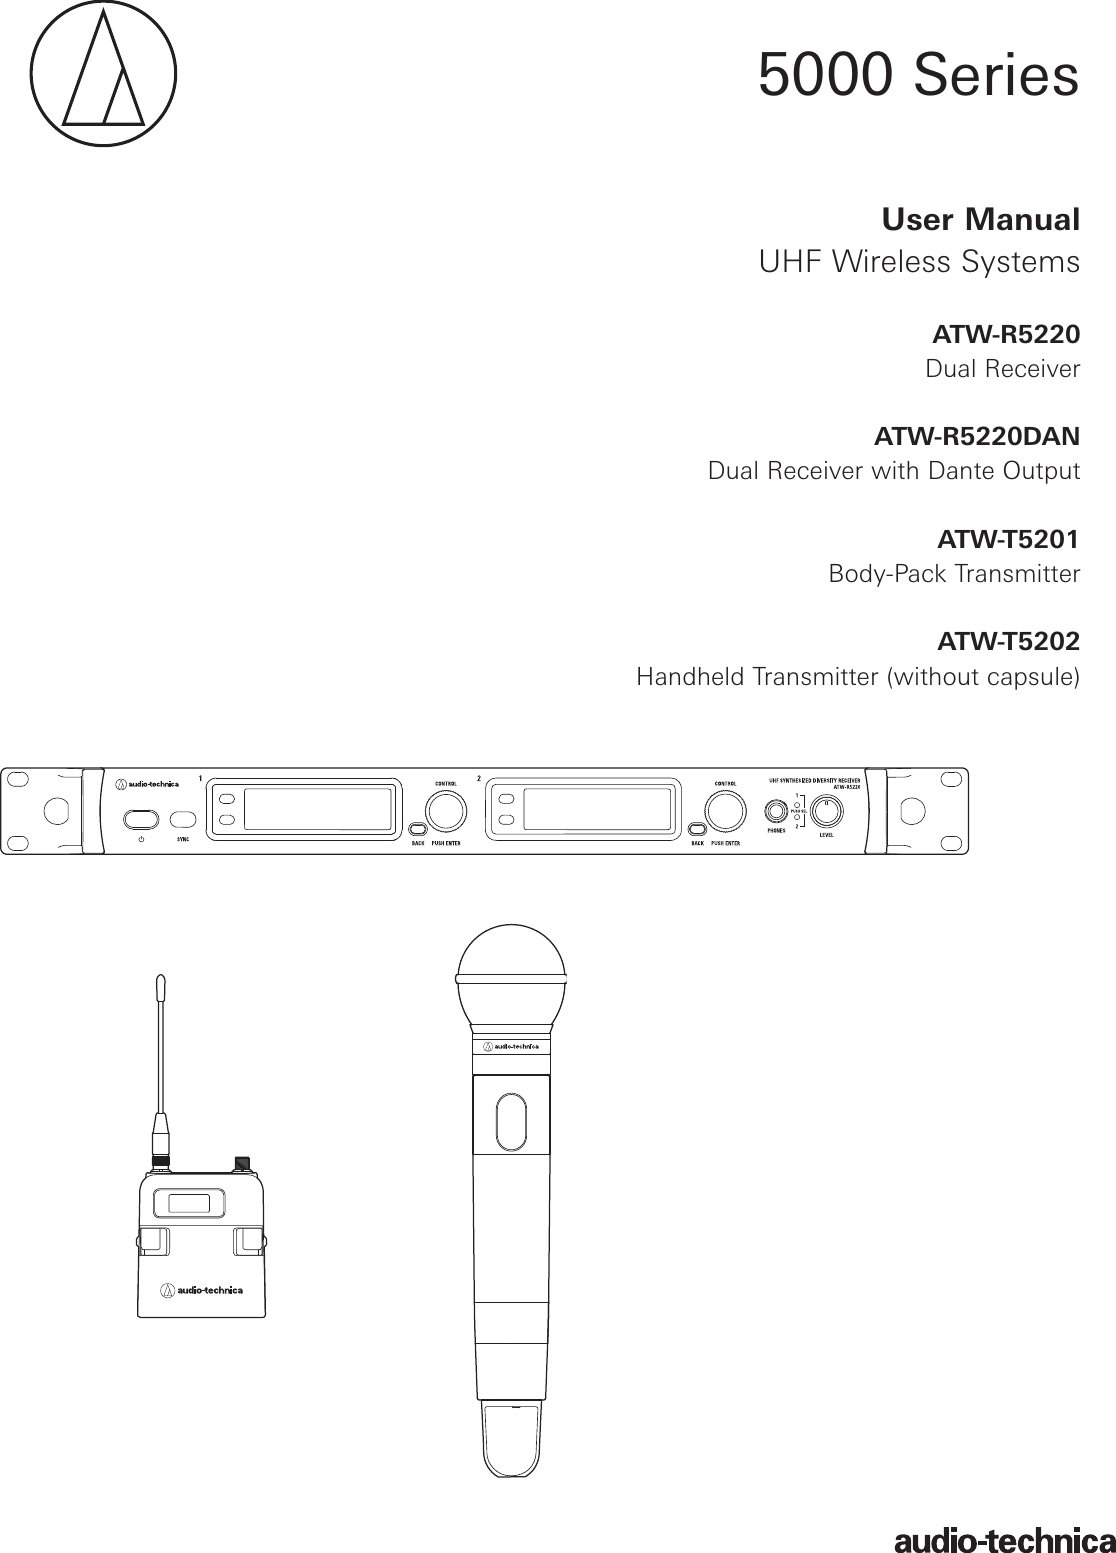 User ManualUHF Wireless SystemsATW-R5220Dual ReceiverATW-R5220DANDual Receiver with Dante OutputATW-T5201Body-Pack TransmitterATW-T5202Handheld Transmitter (without capsule)5000 Series